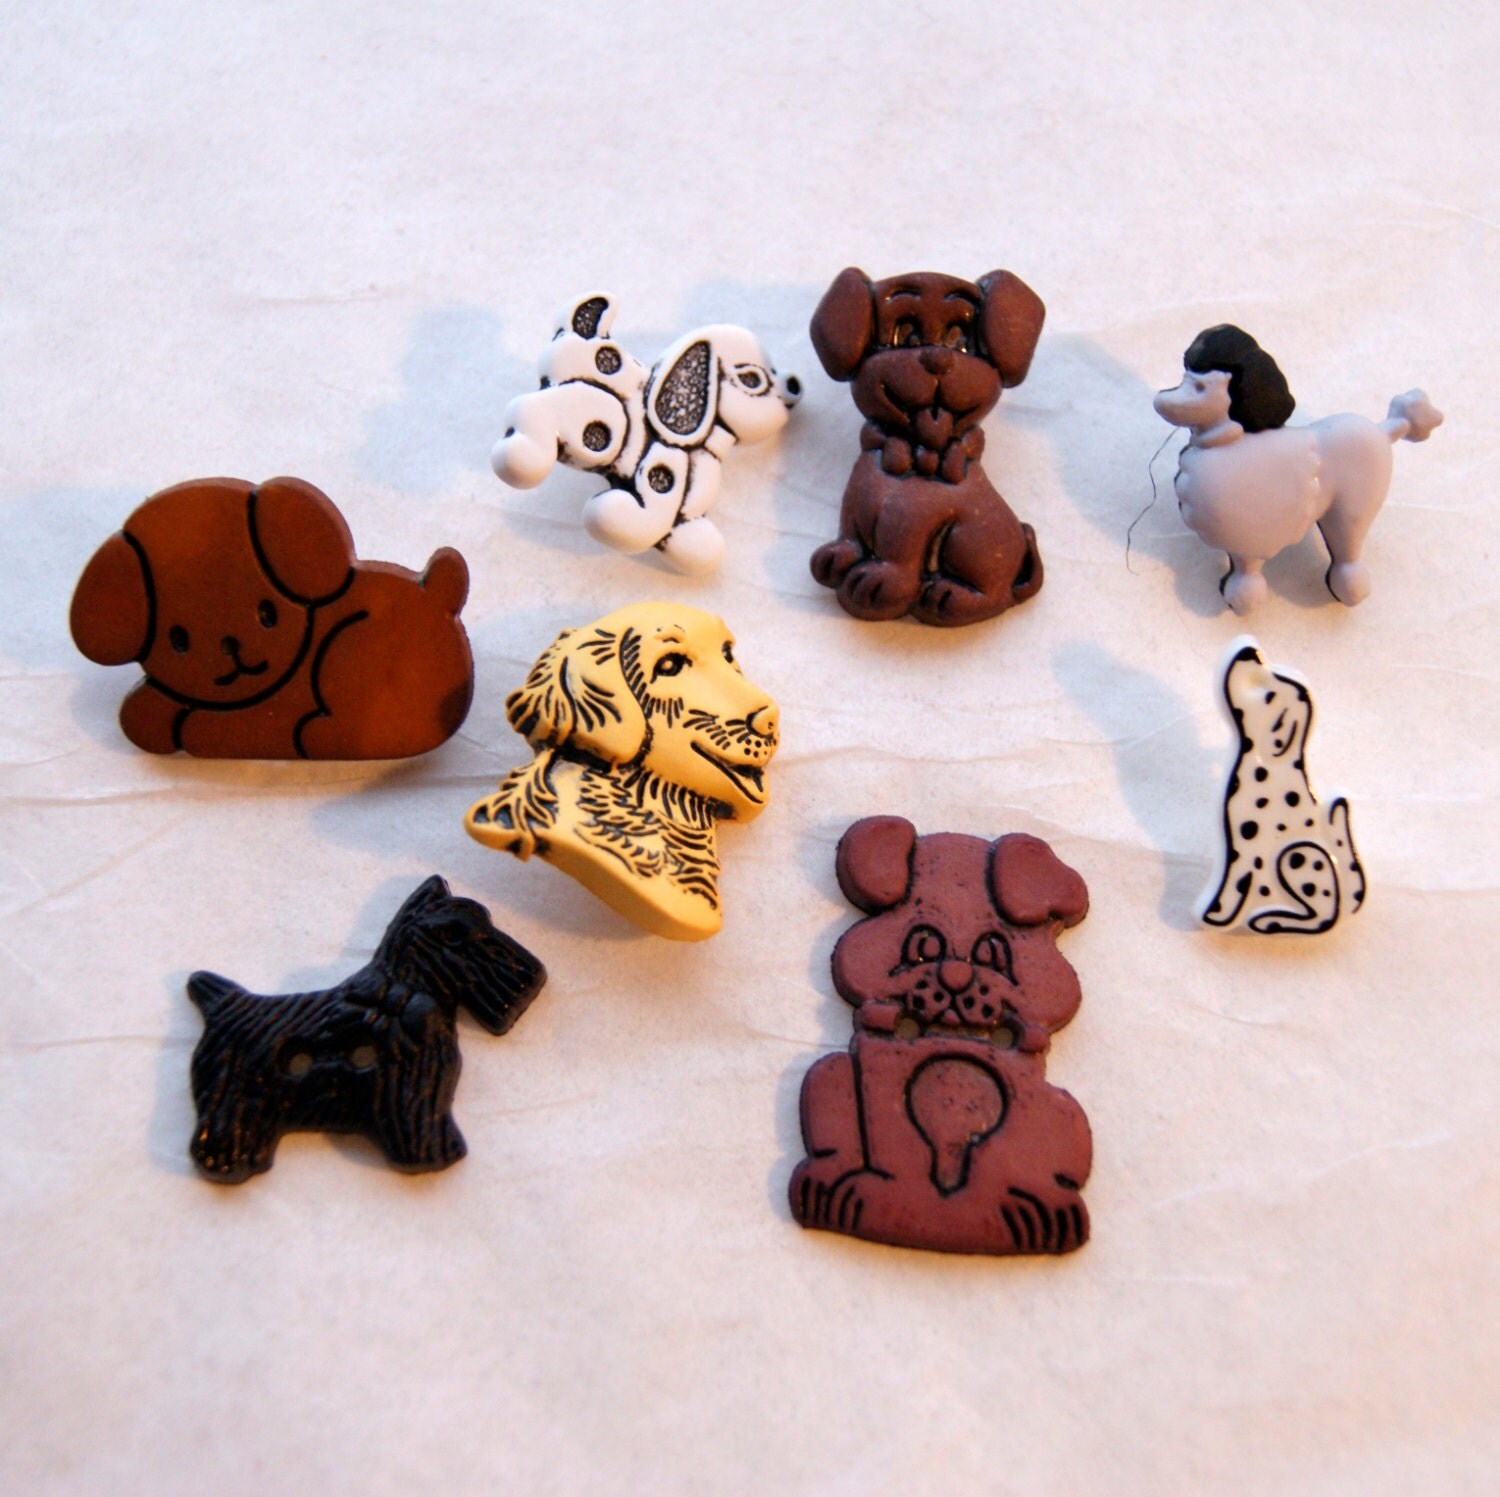 8 Dog Buttons Shankback and Sew through Sewing Buttons